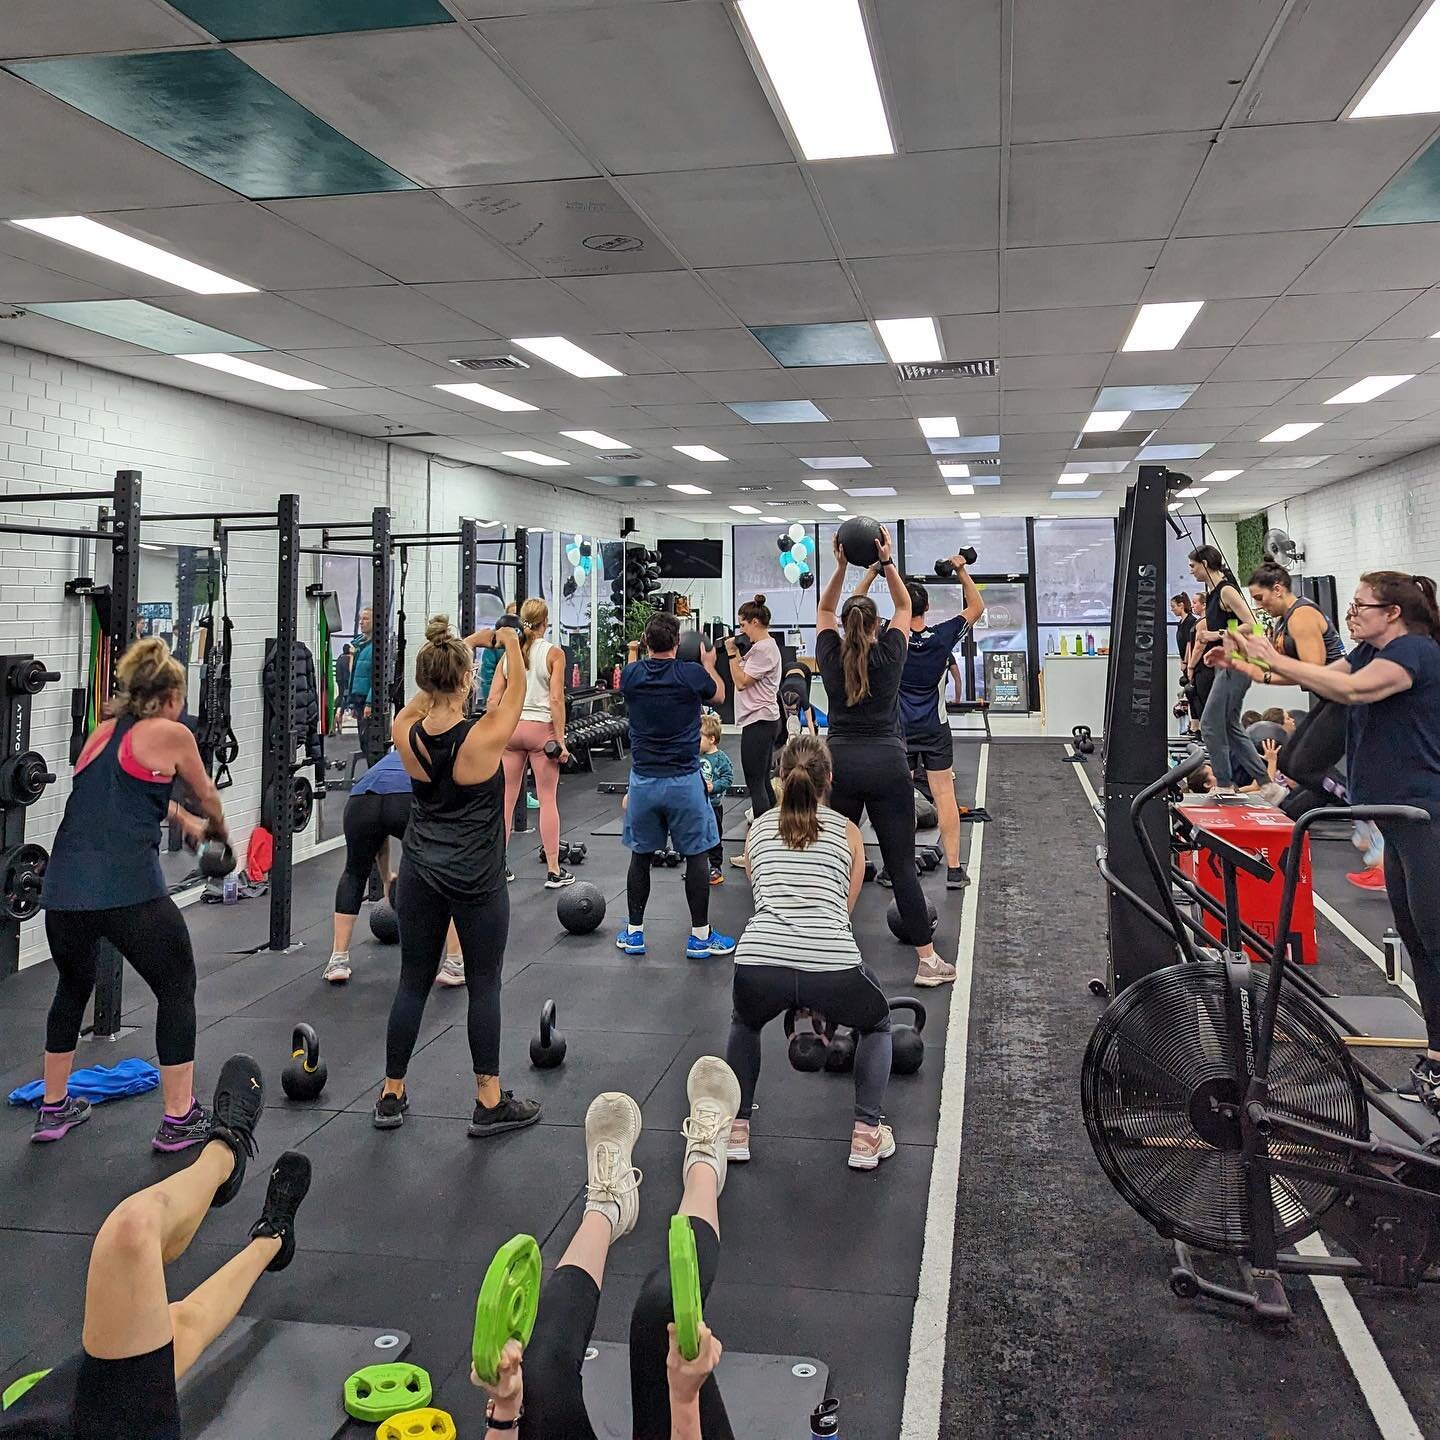 Hashtag bestest fitfam community around 🥹🫶🏼

Our Members Day morning was a huge success &amp; we are blessed with the best! ❤️

THANK YOU FIT FOR LIFE CREW !